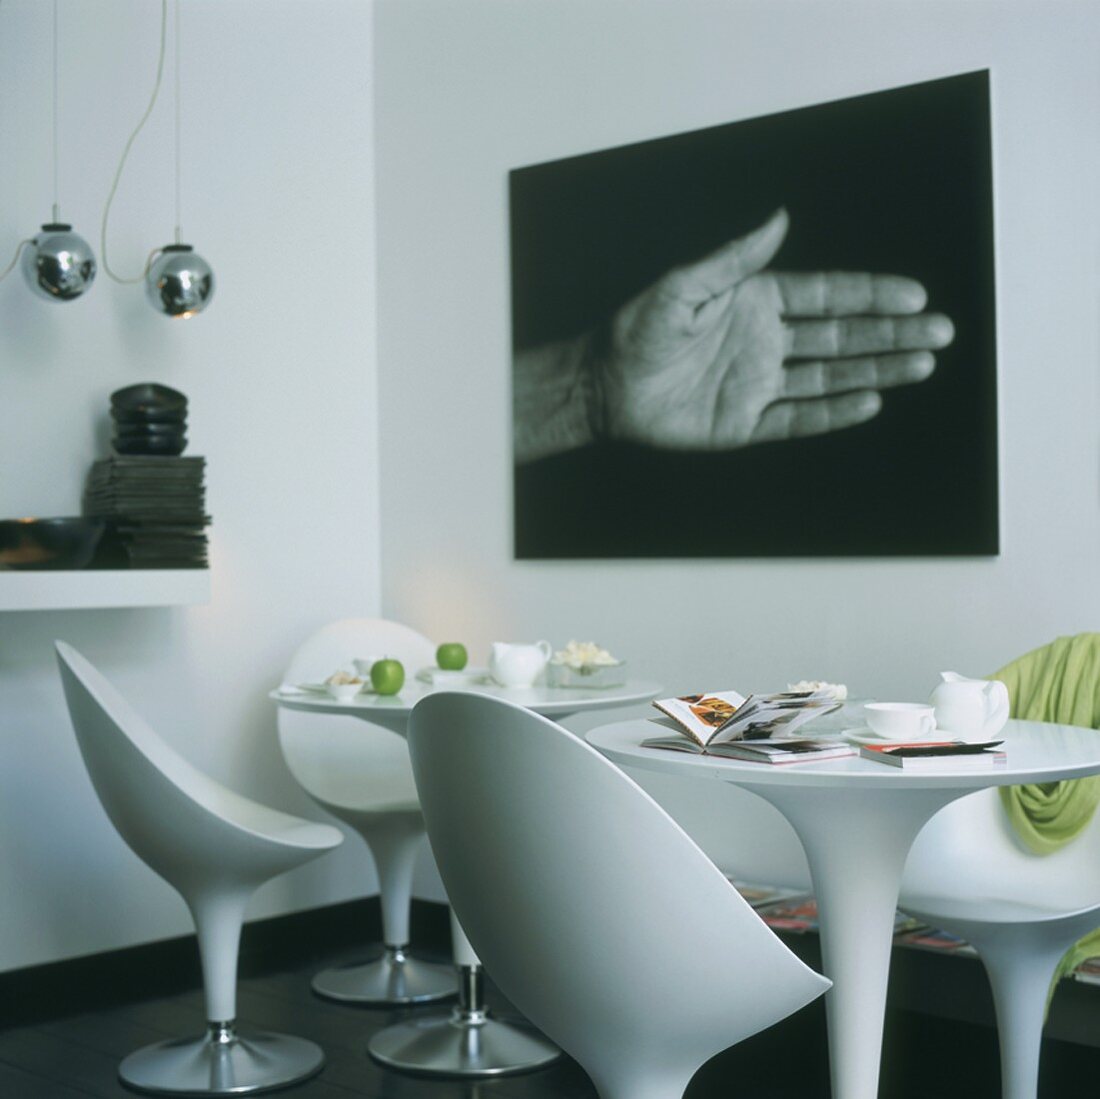 Corner of modern interior with white shell chairs, round table and black and white photo on wall